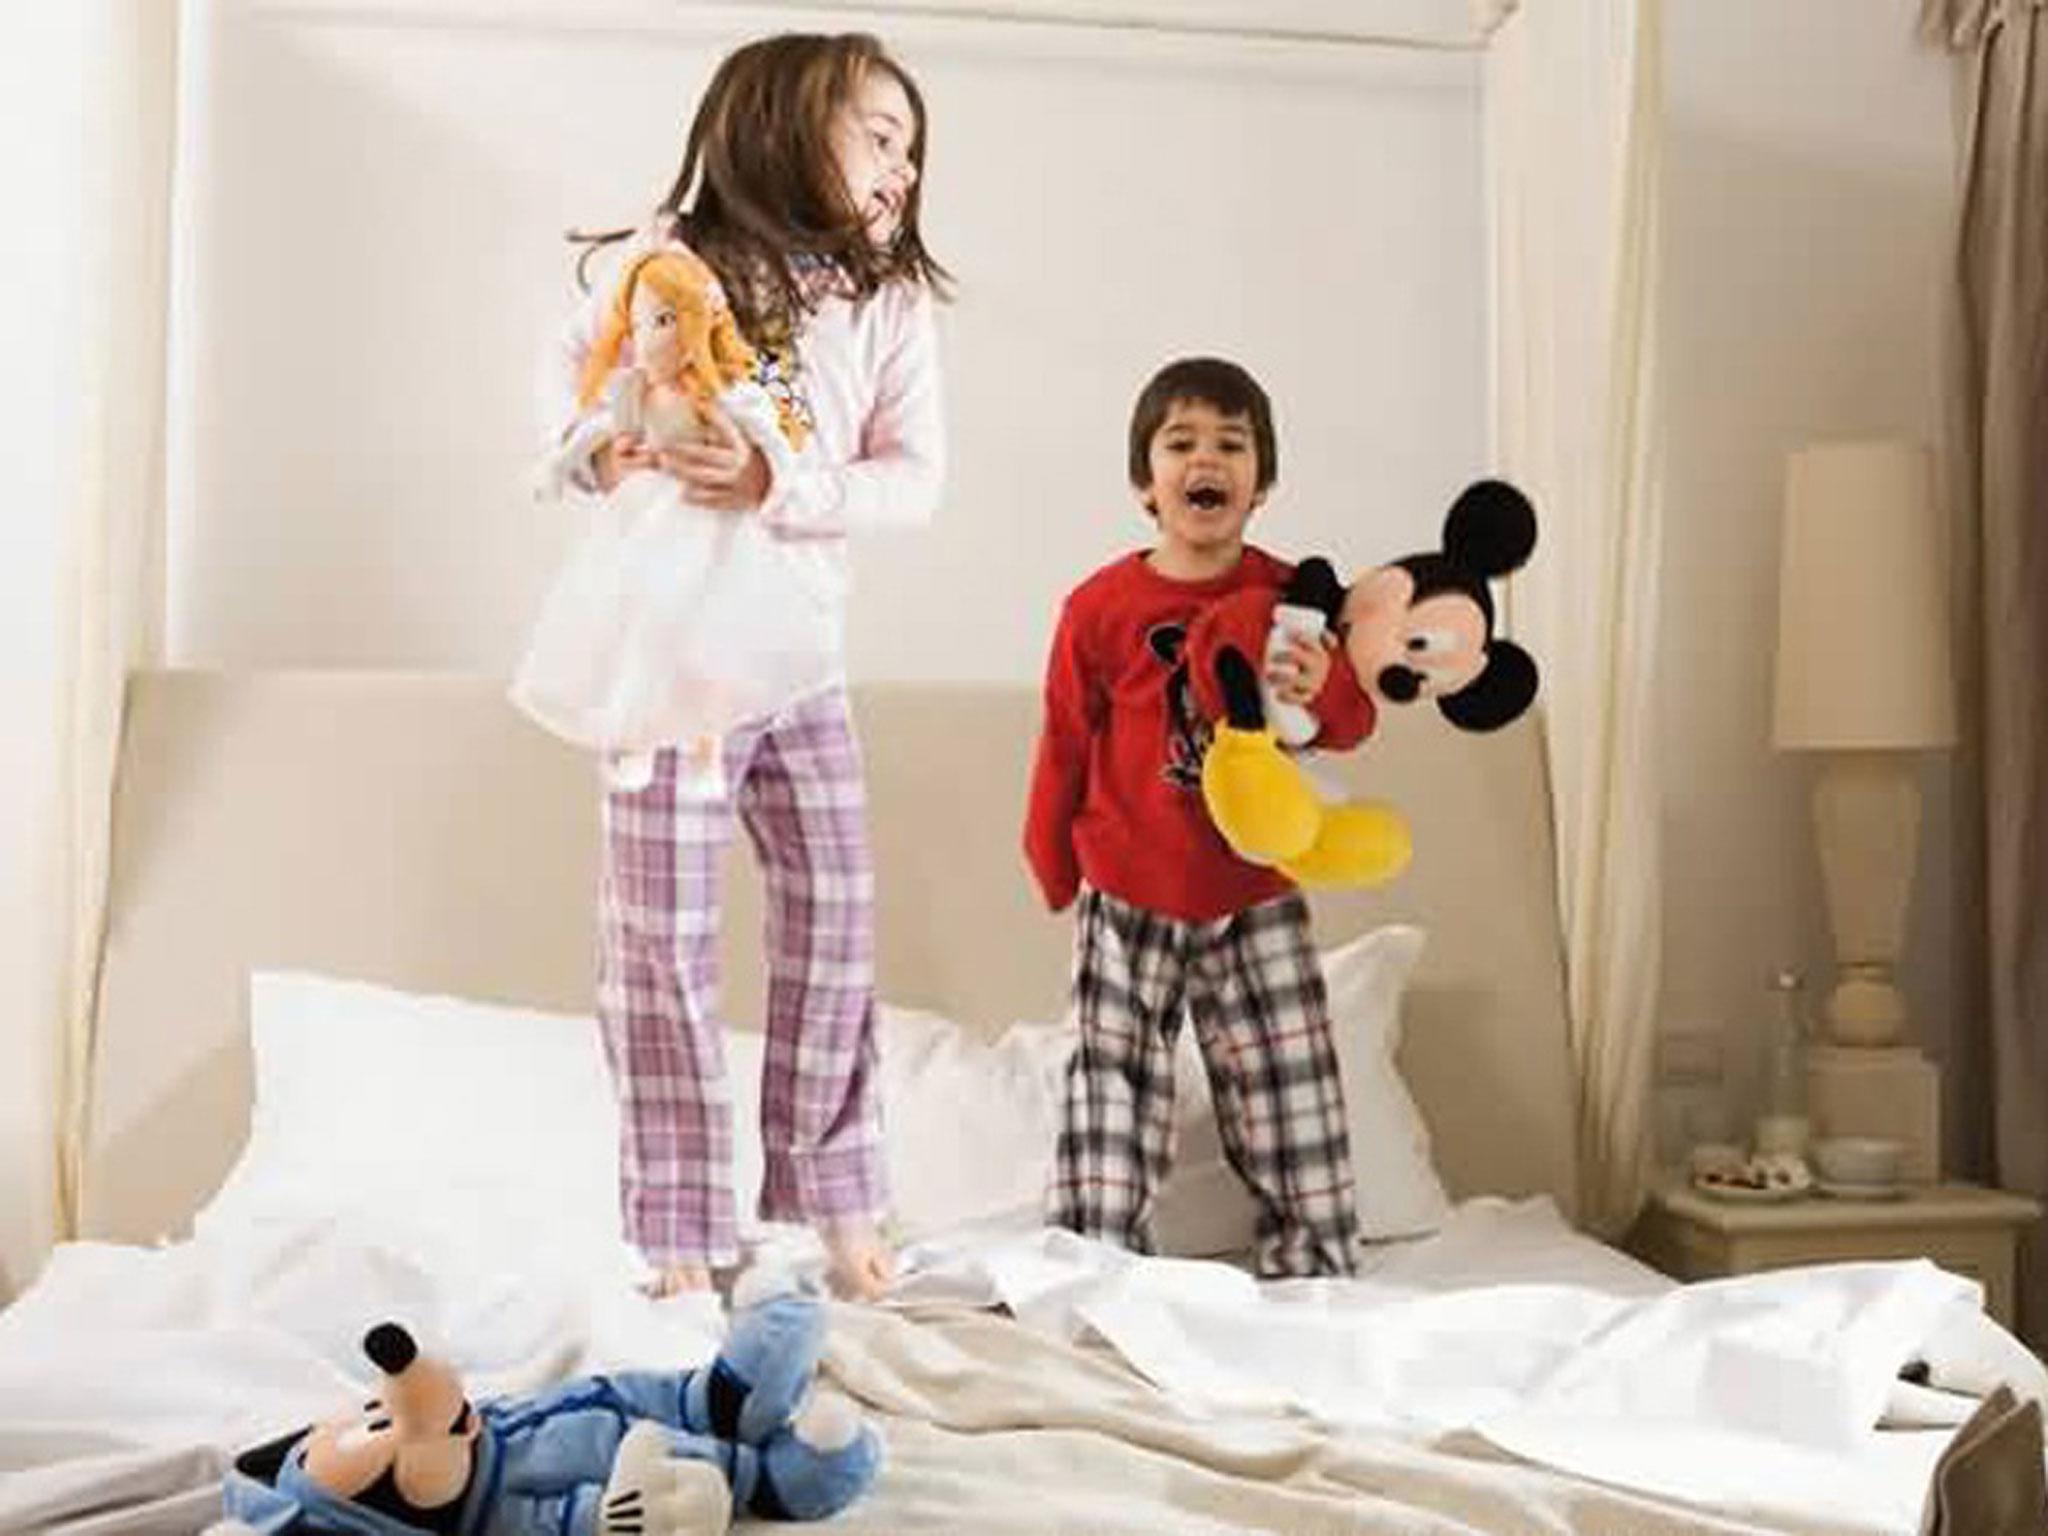 Child’s play: Luxury hotels are making big efforts to attract families